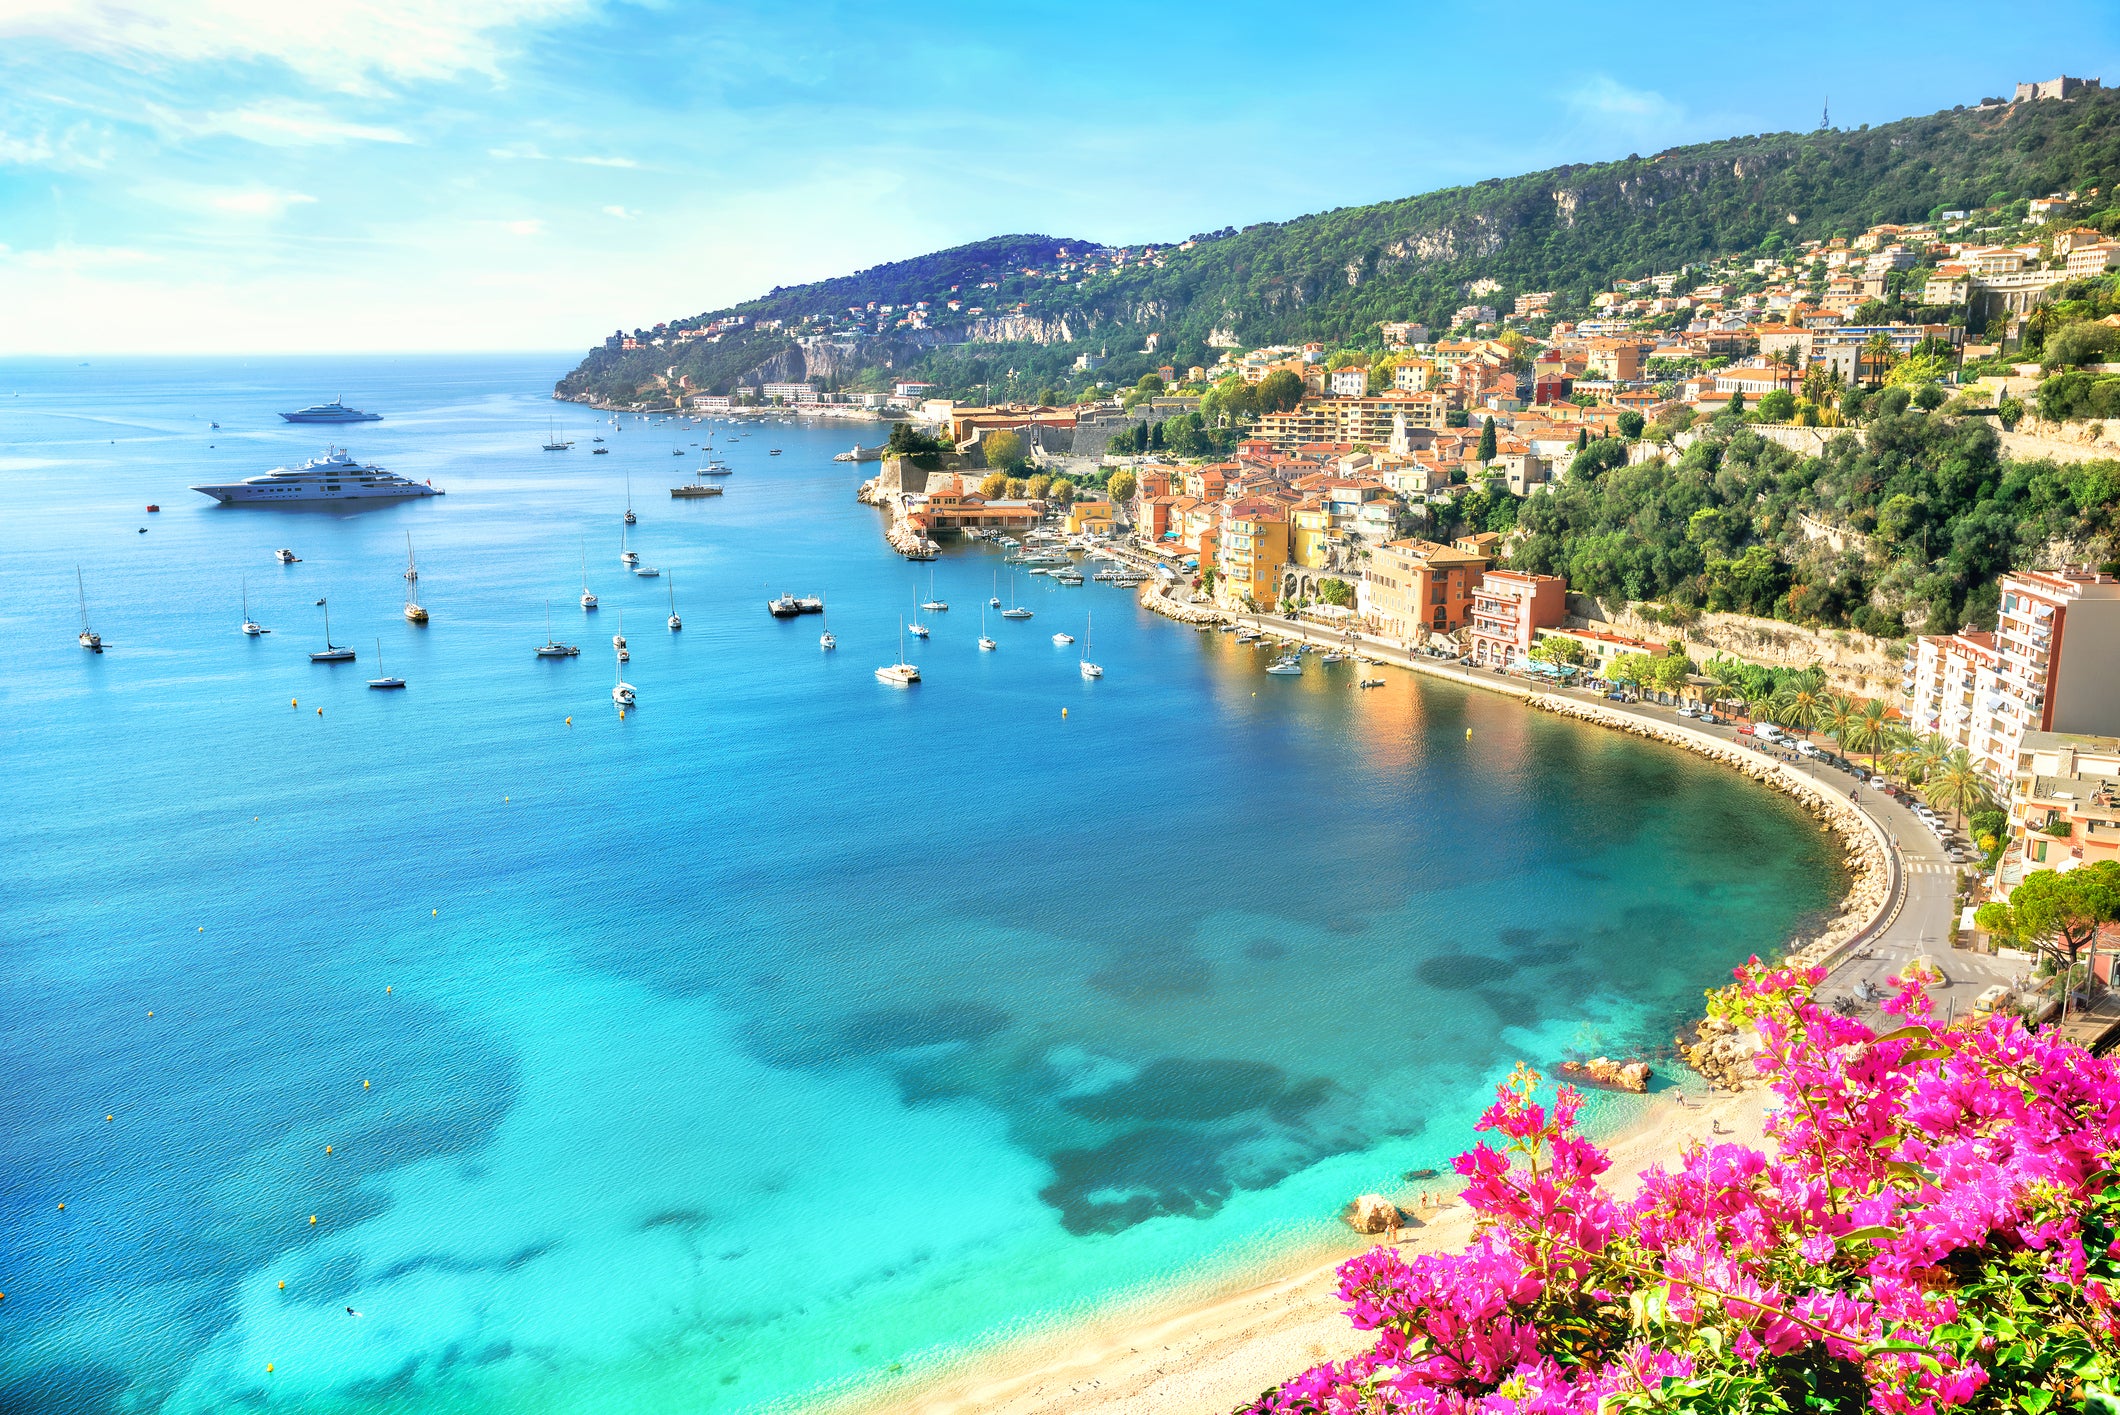 The French Riviera is one of the country’s most popular regions to visit